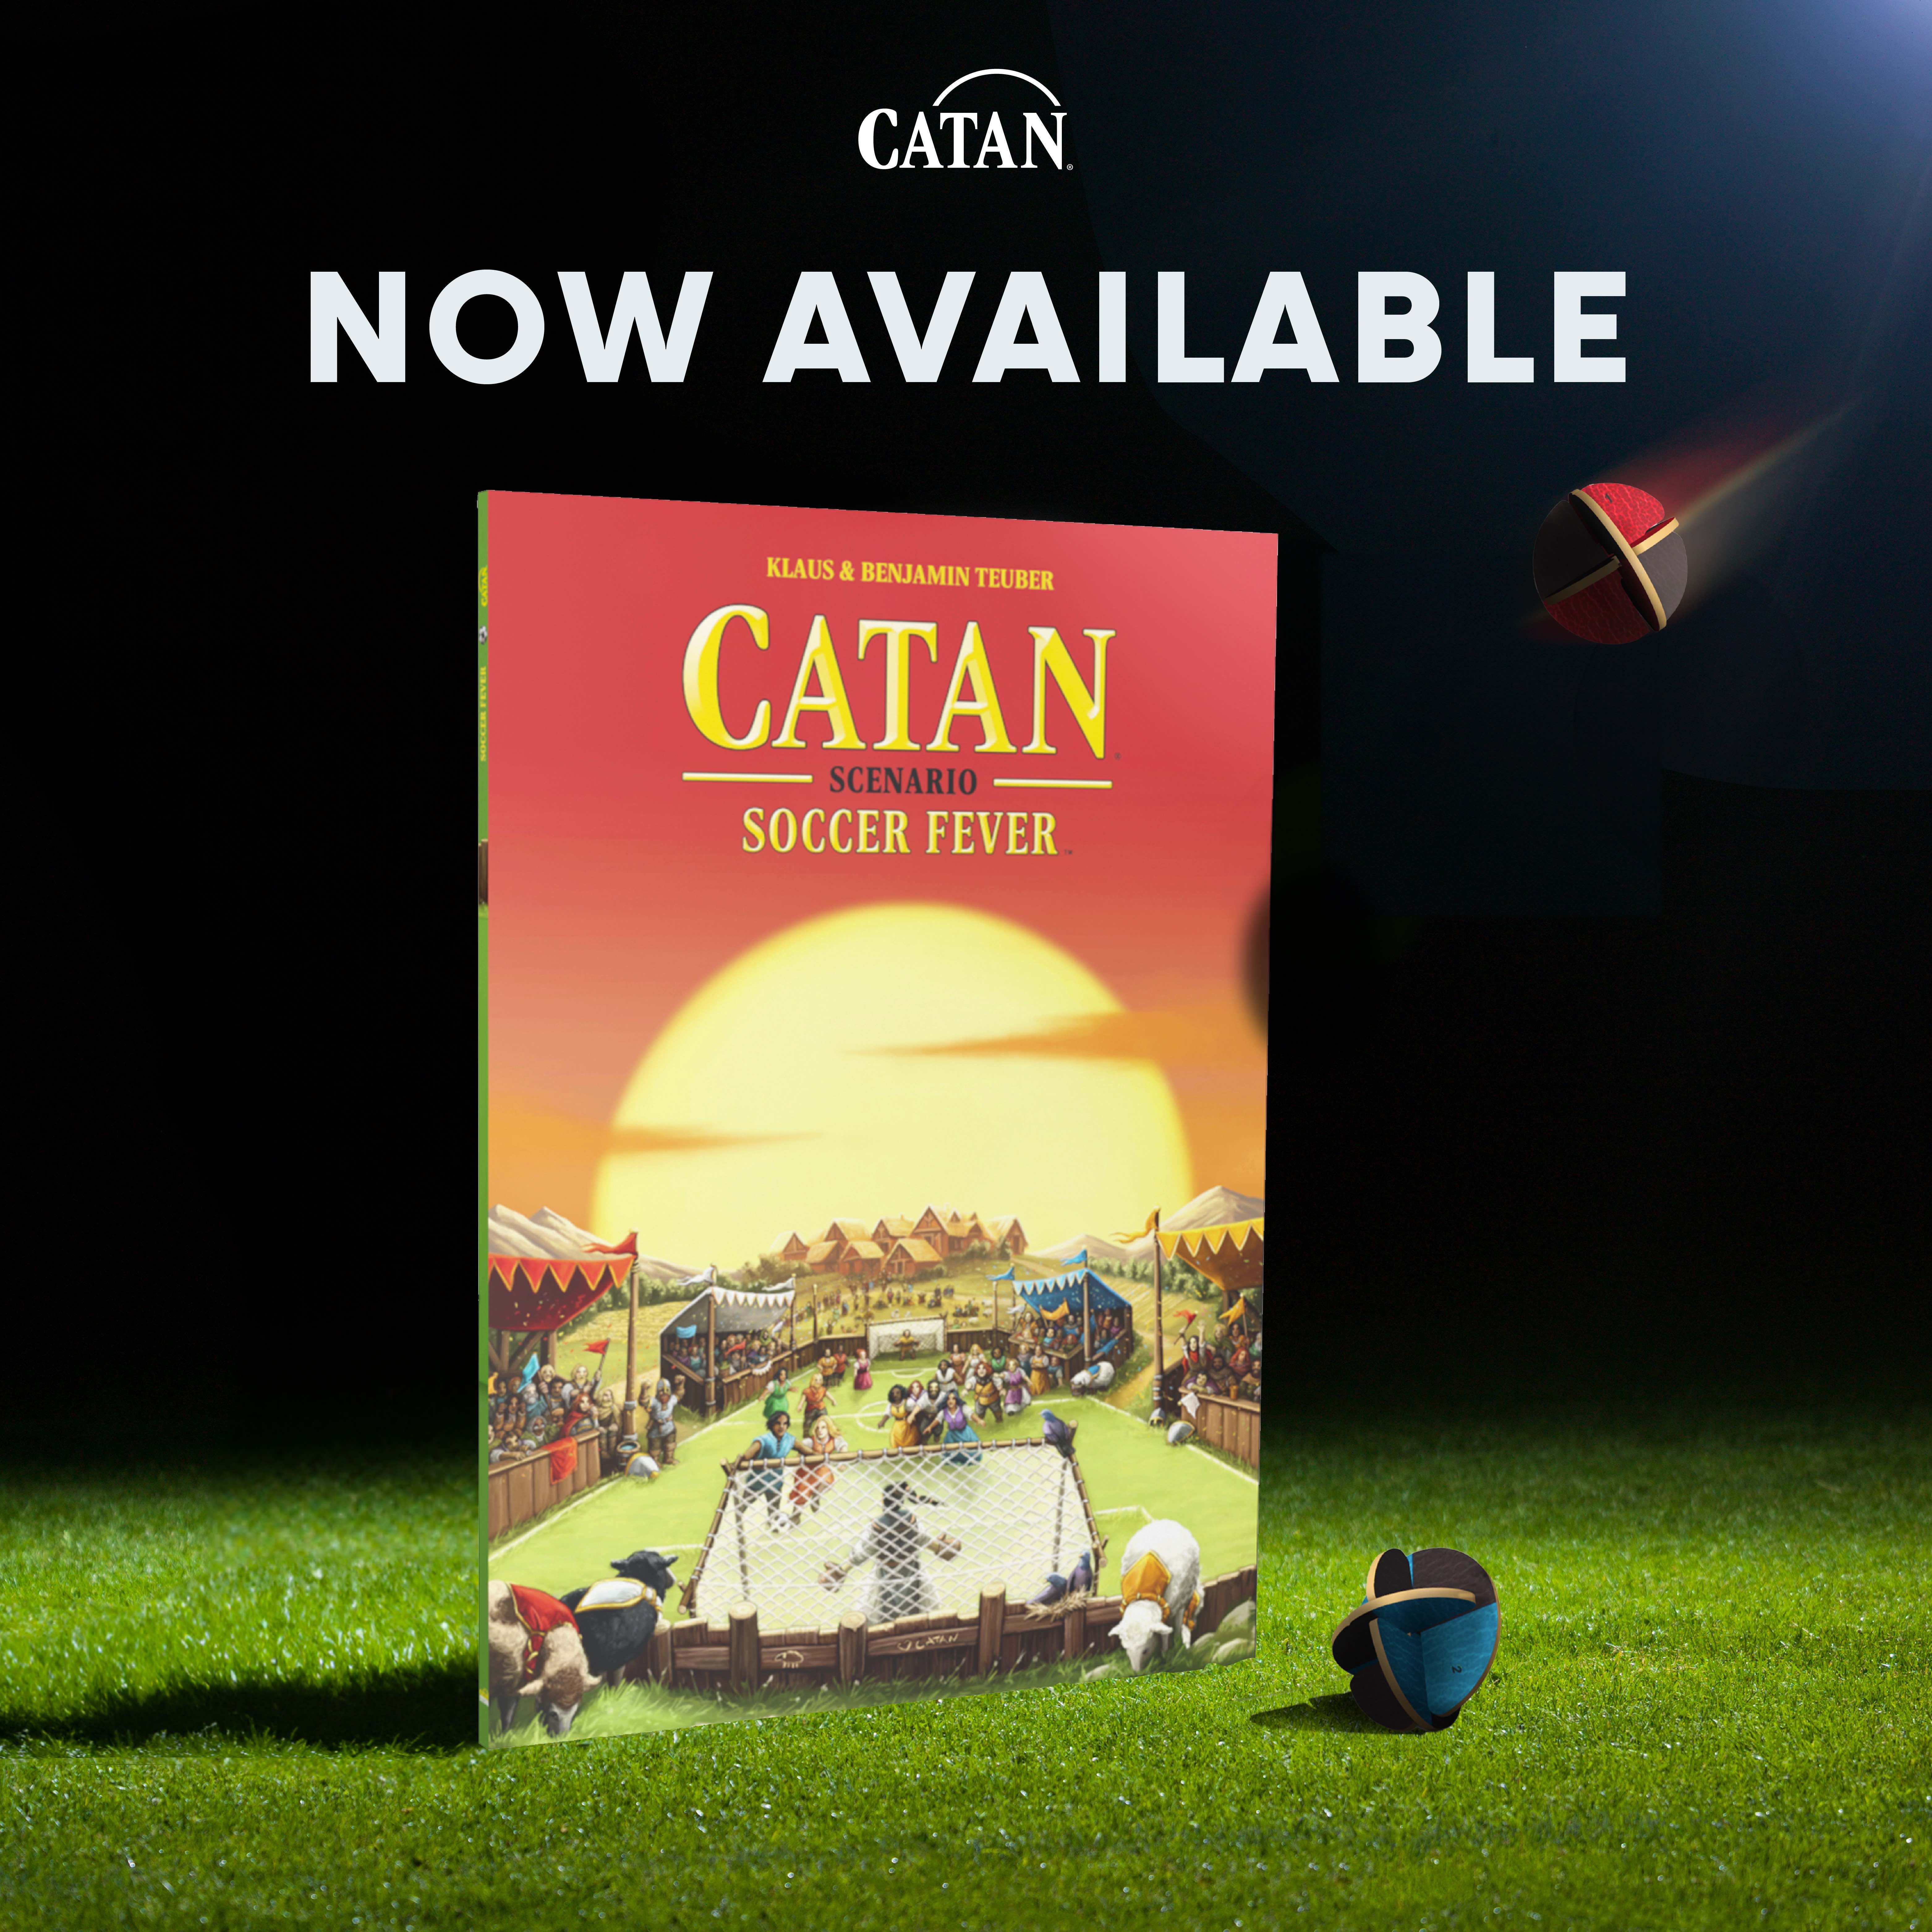 CATAN – Soccer Fever Now Available package image